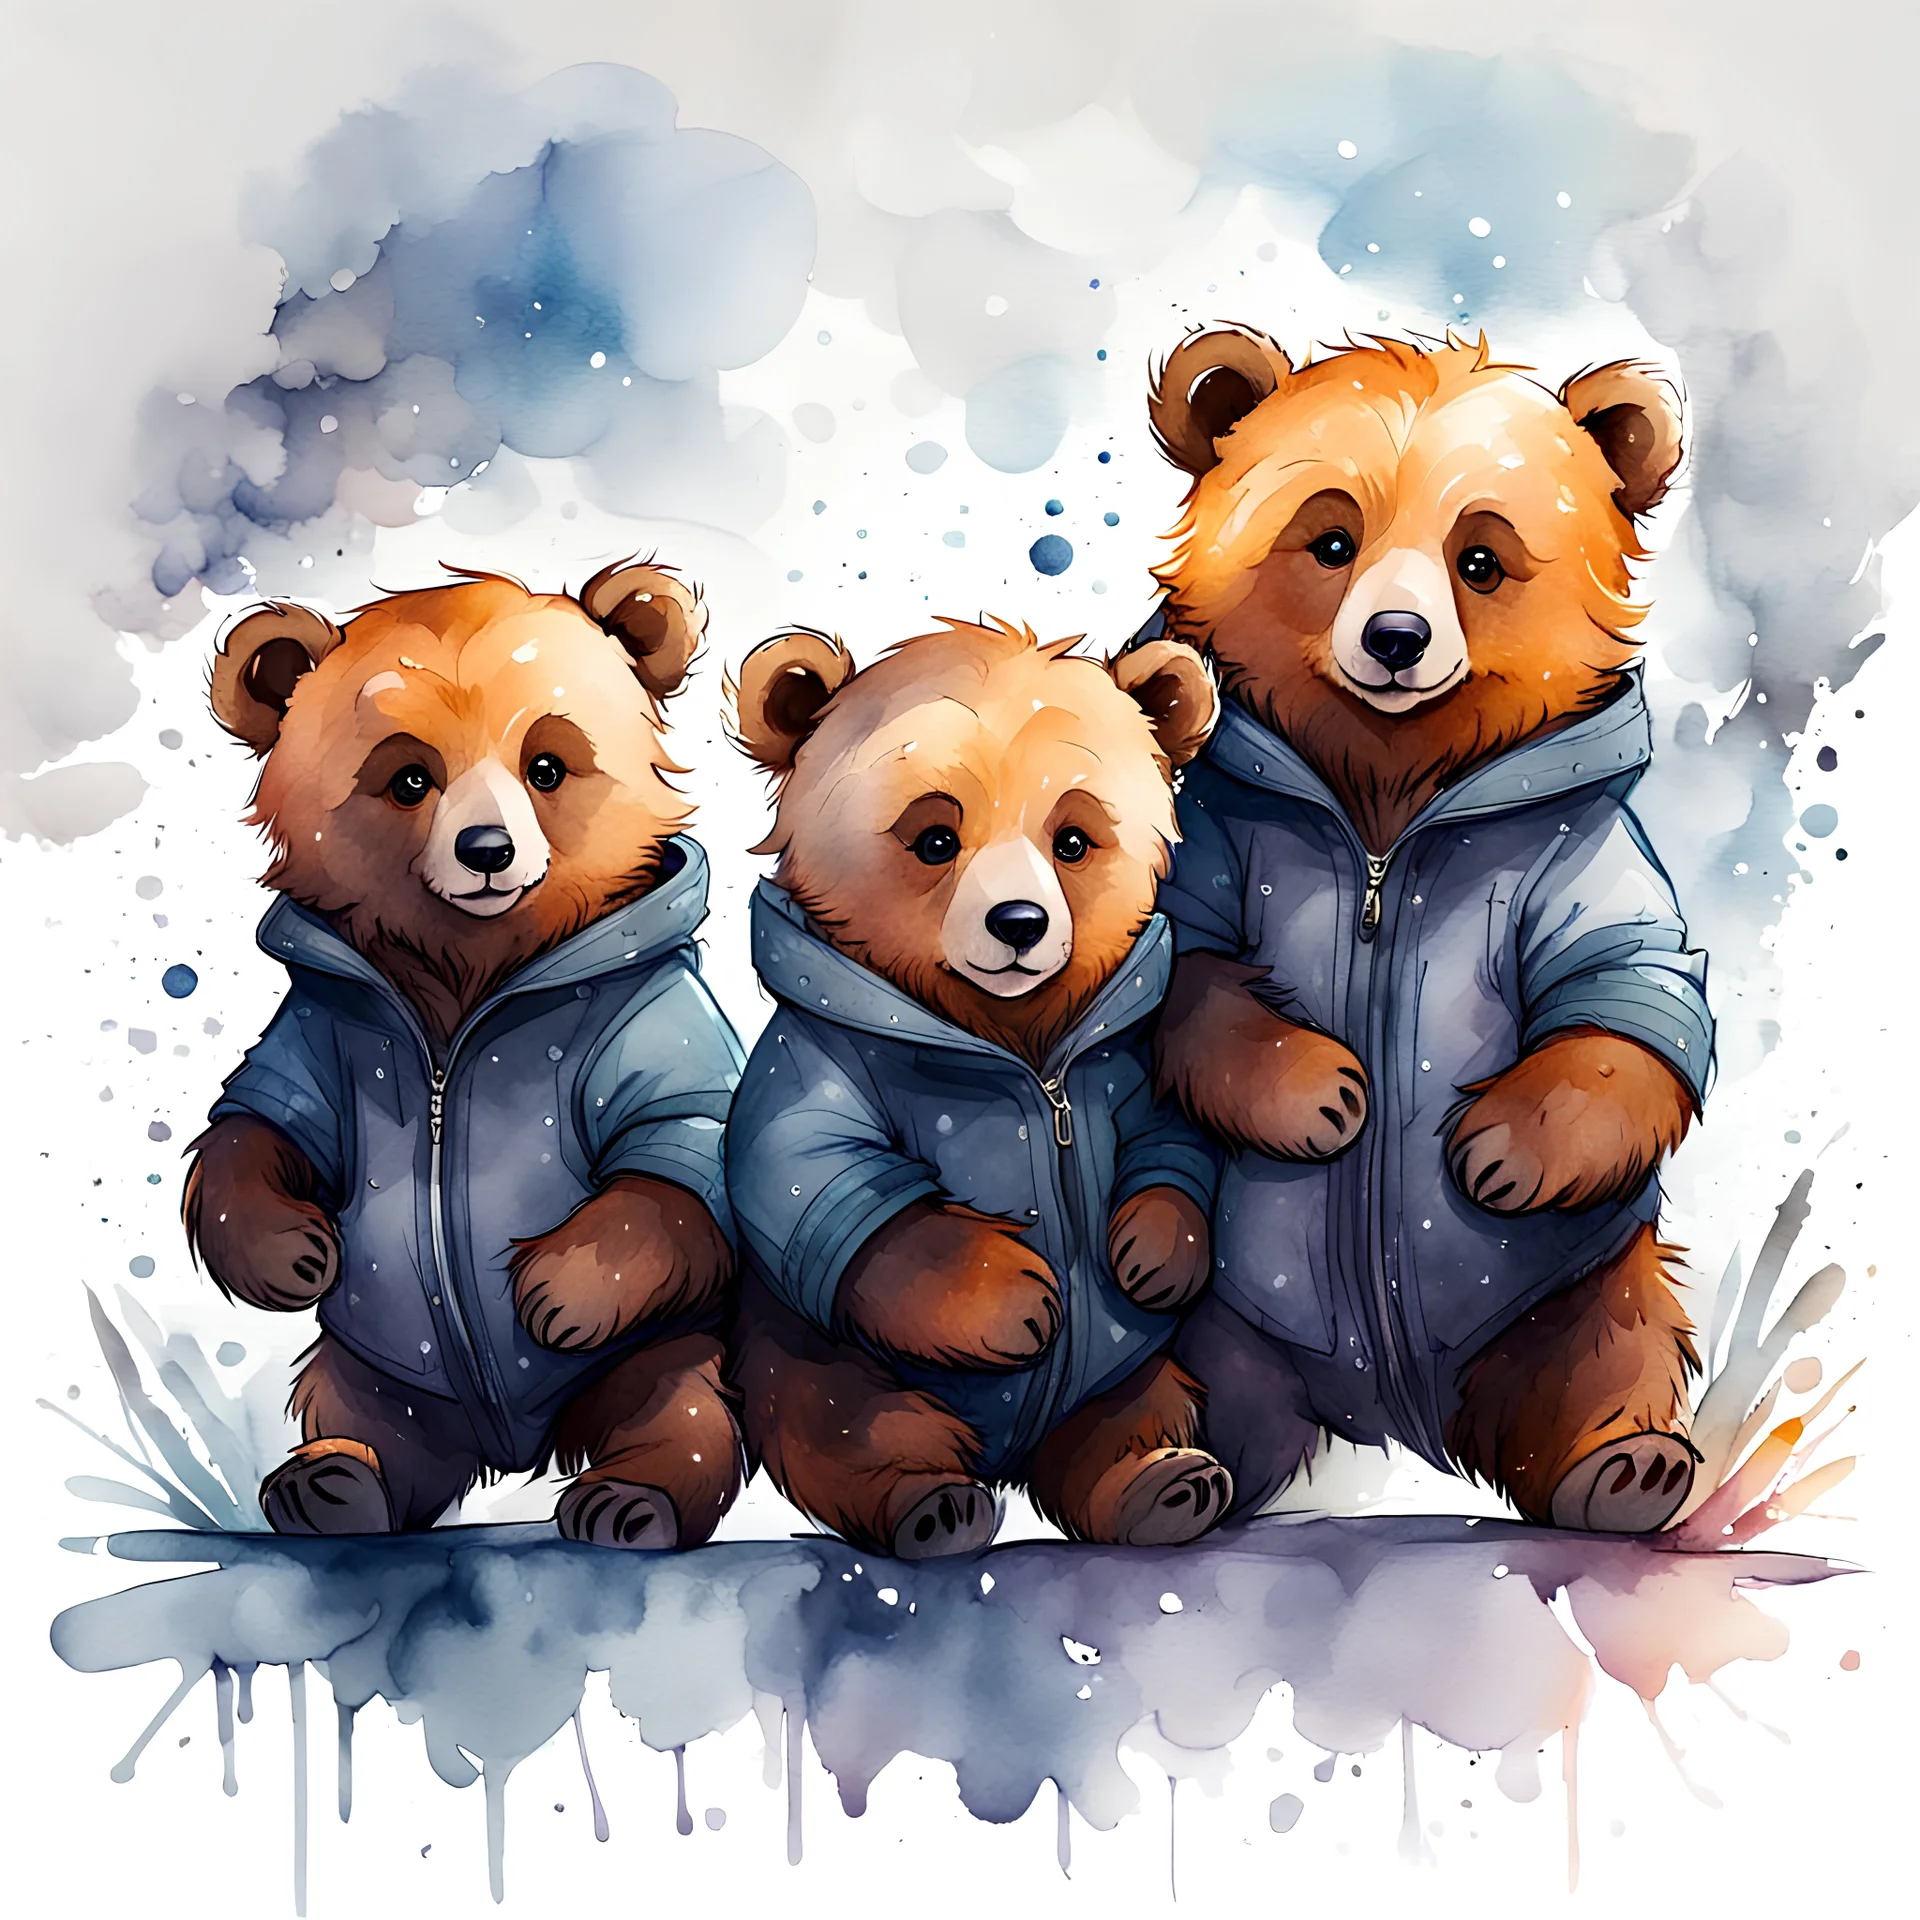 watercolor drawing of three russian little bears on a white background, Trending on Artstation, {creative commons}, fanart, AIart, {Woolitize}, by Charlie Bowater, Illustration, Color Grading, Filmic, Nikon D750, Brenizer Method, Perspective, Depth of Field, Field of View, F/2.8, Lens Flare, Tonal Colors, 8K, Full-HD, ProPhoto RGB, Perfectionism, Rim Lighting, Natural Lighting, Soft Lig